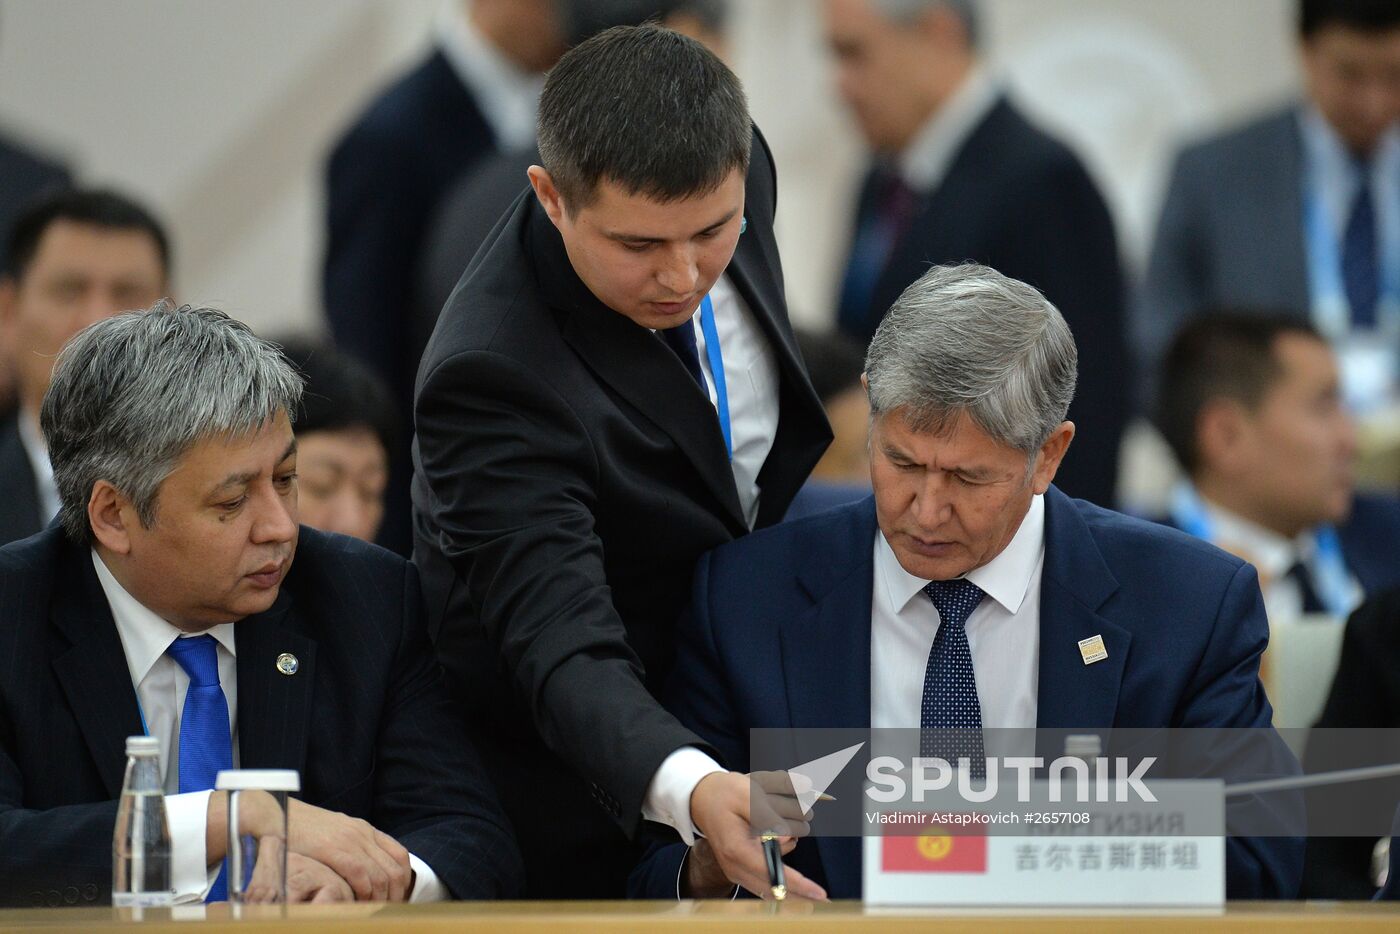 Signing of joint documents following the SCO Heads of State Council Meeting